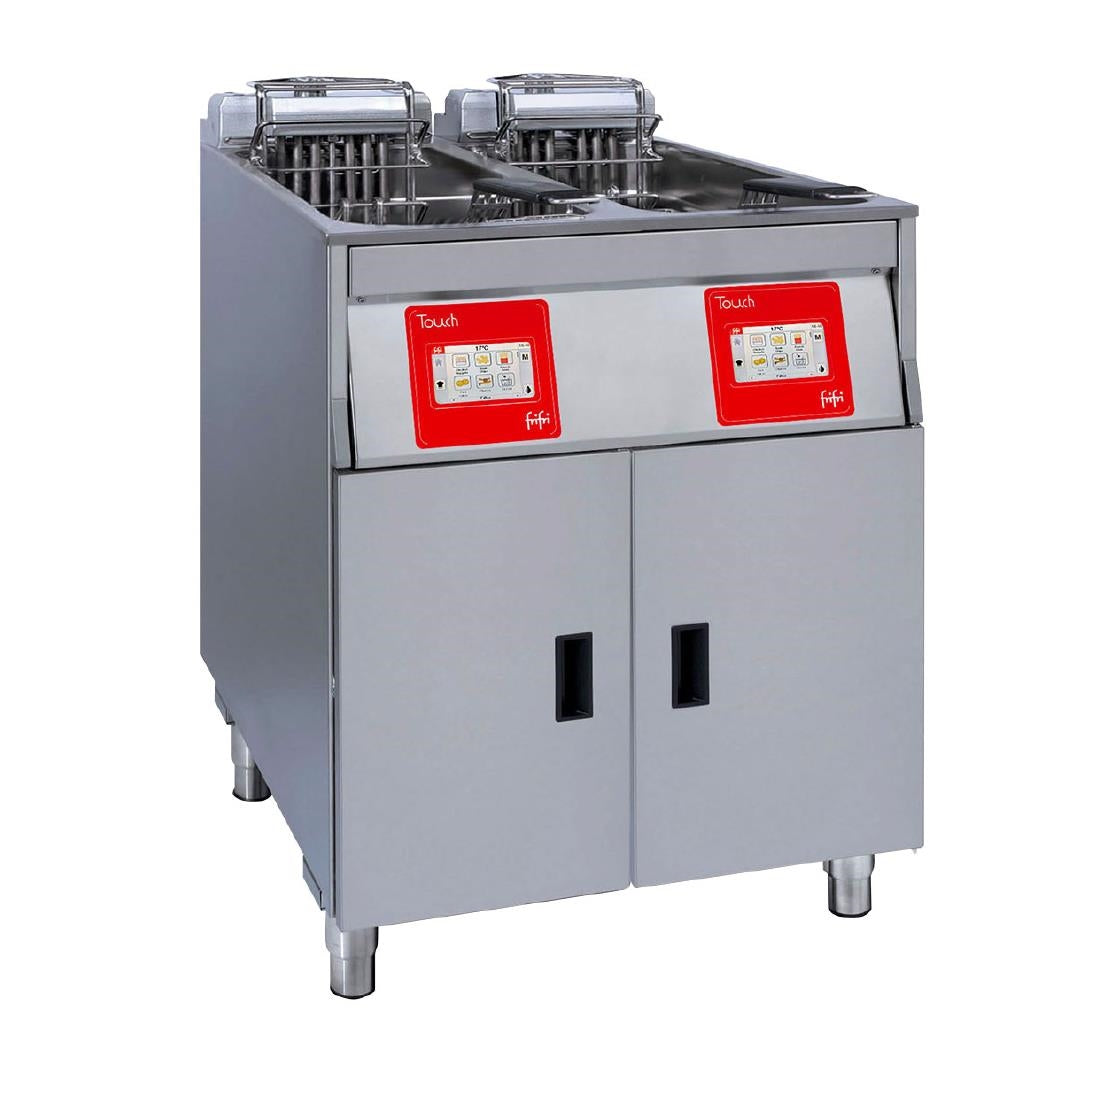 HS016-3PH FriFri Touch 622 Electric Free-standing Fryer Twin Tank Twin Baskets 2x11.4kW Three Phase TL622L32G0